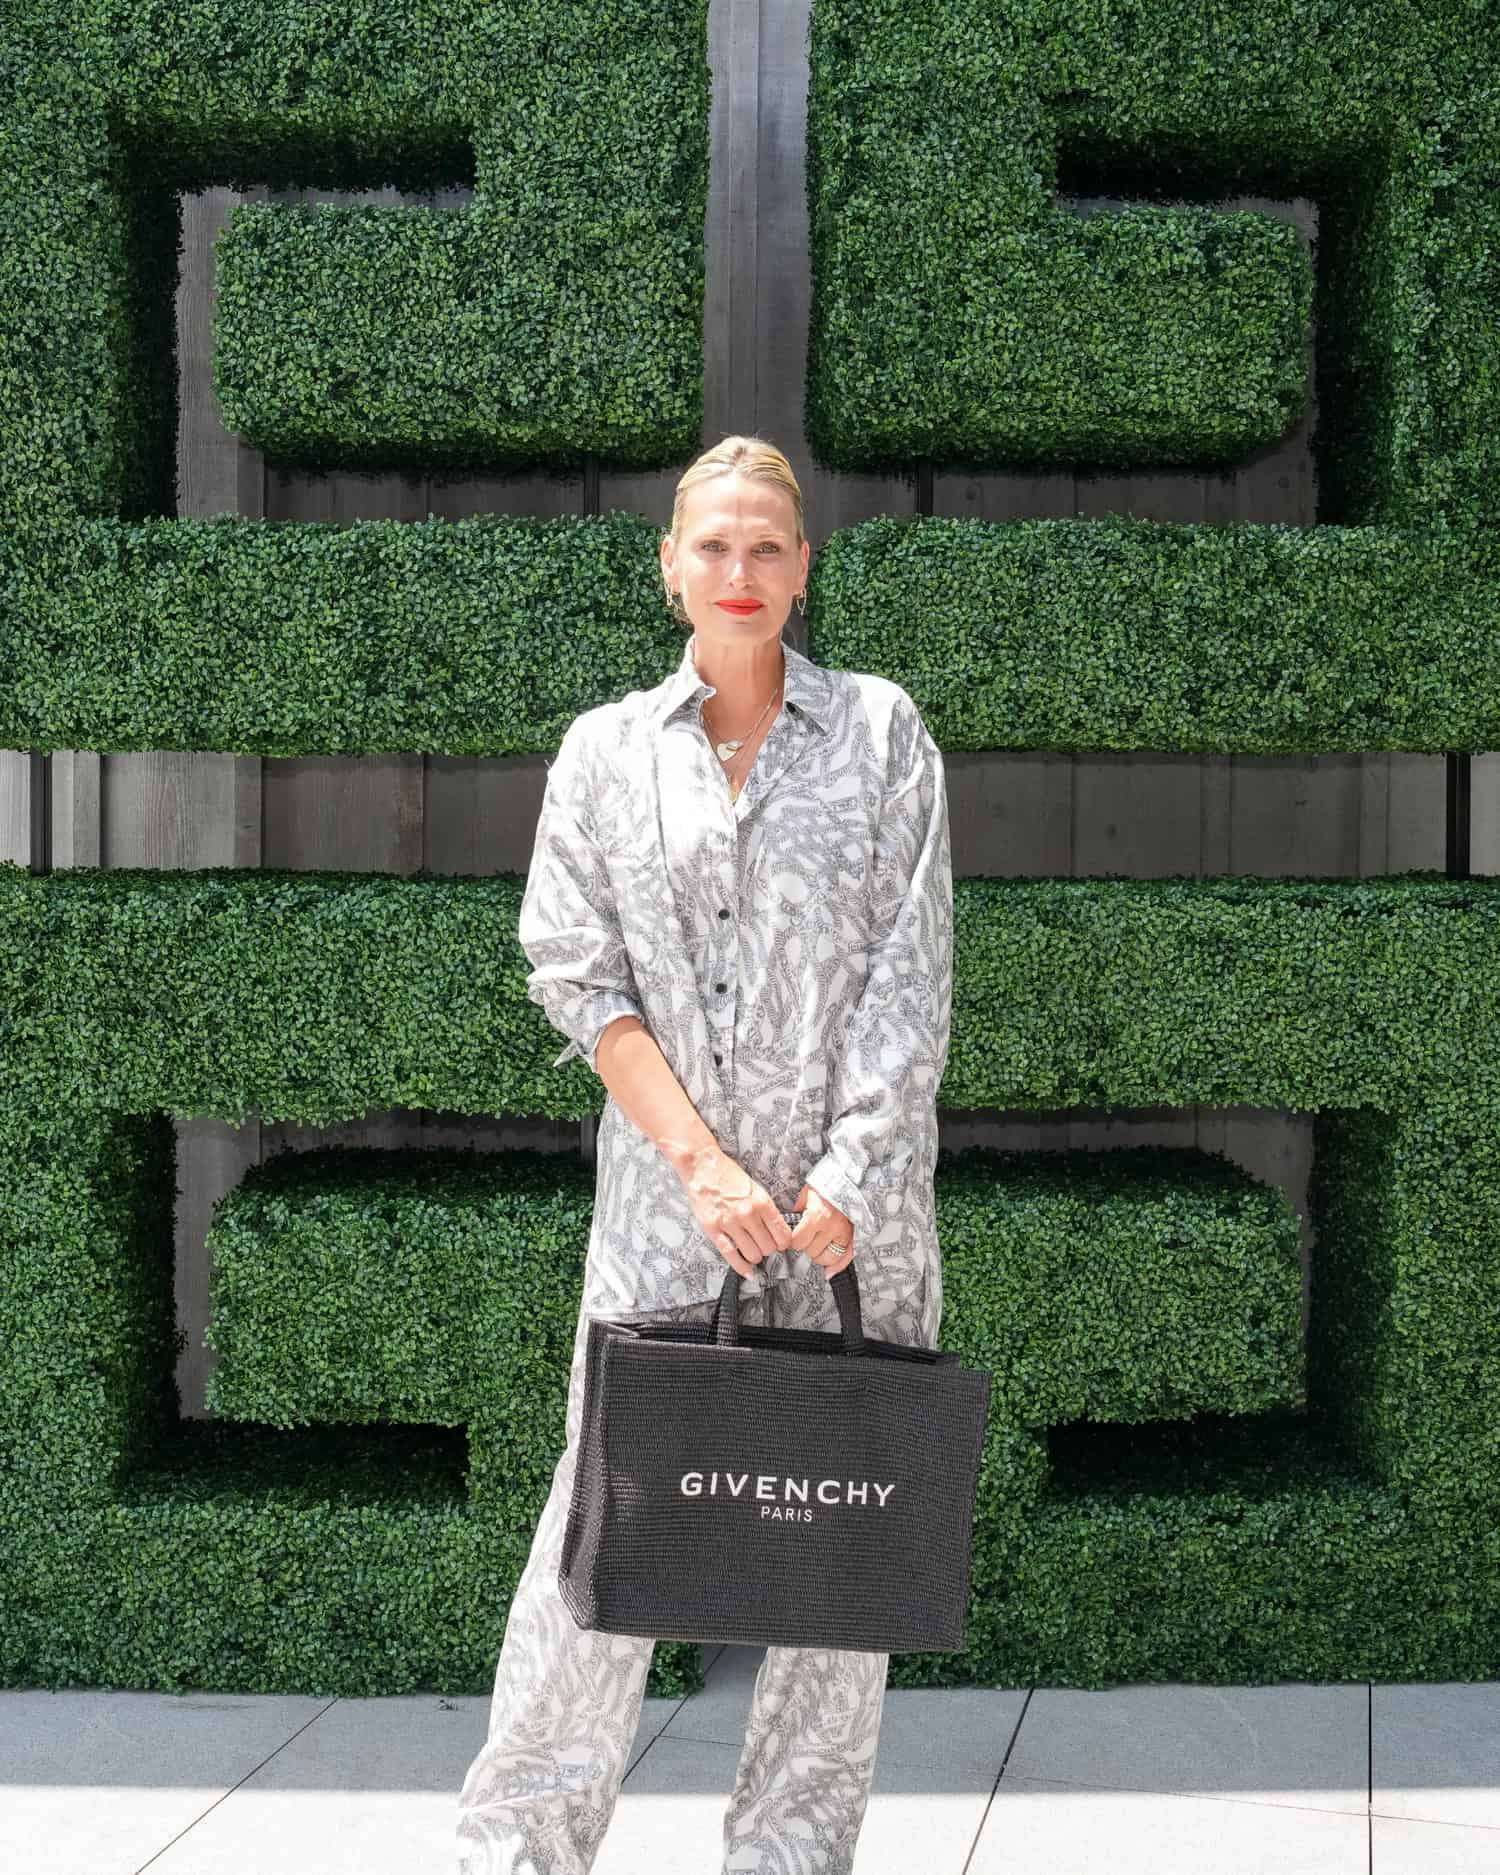 Givenchy opens an intimate pop-up store to celebrate Clare Waight